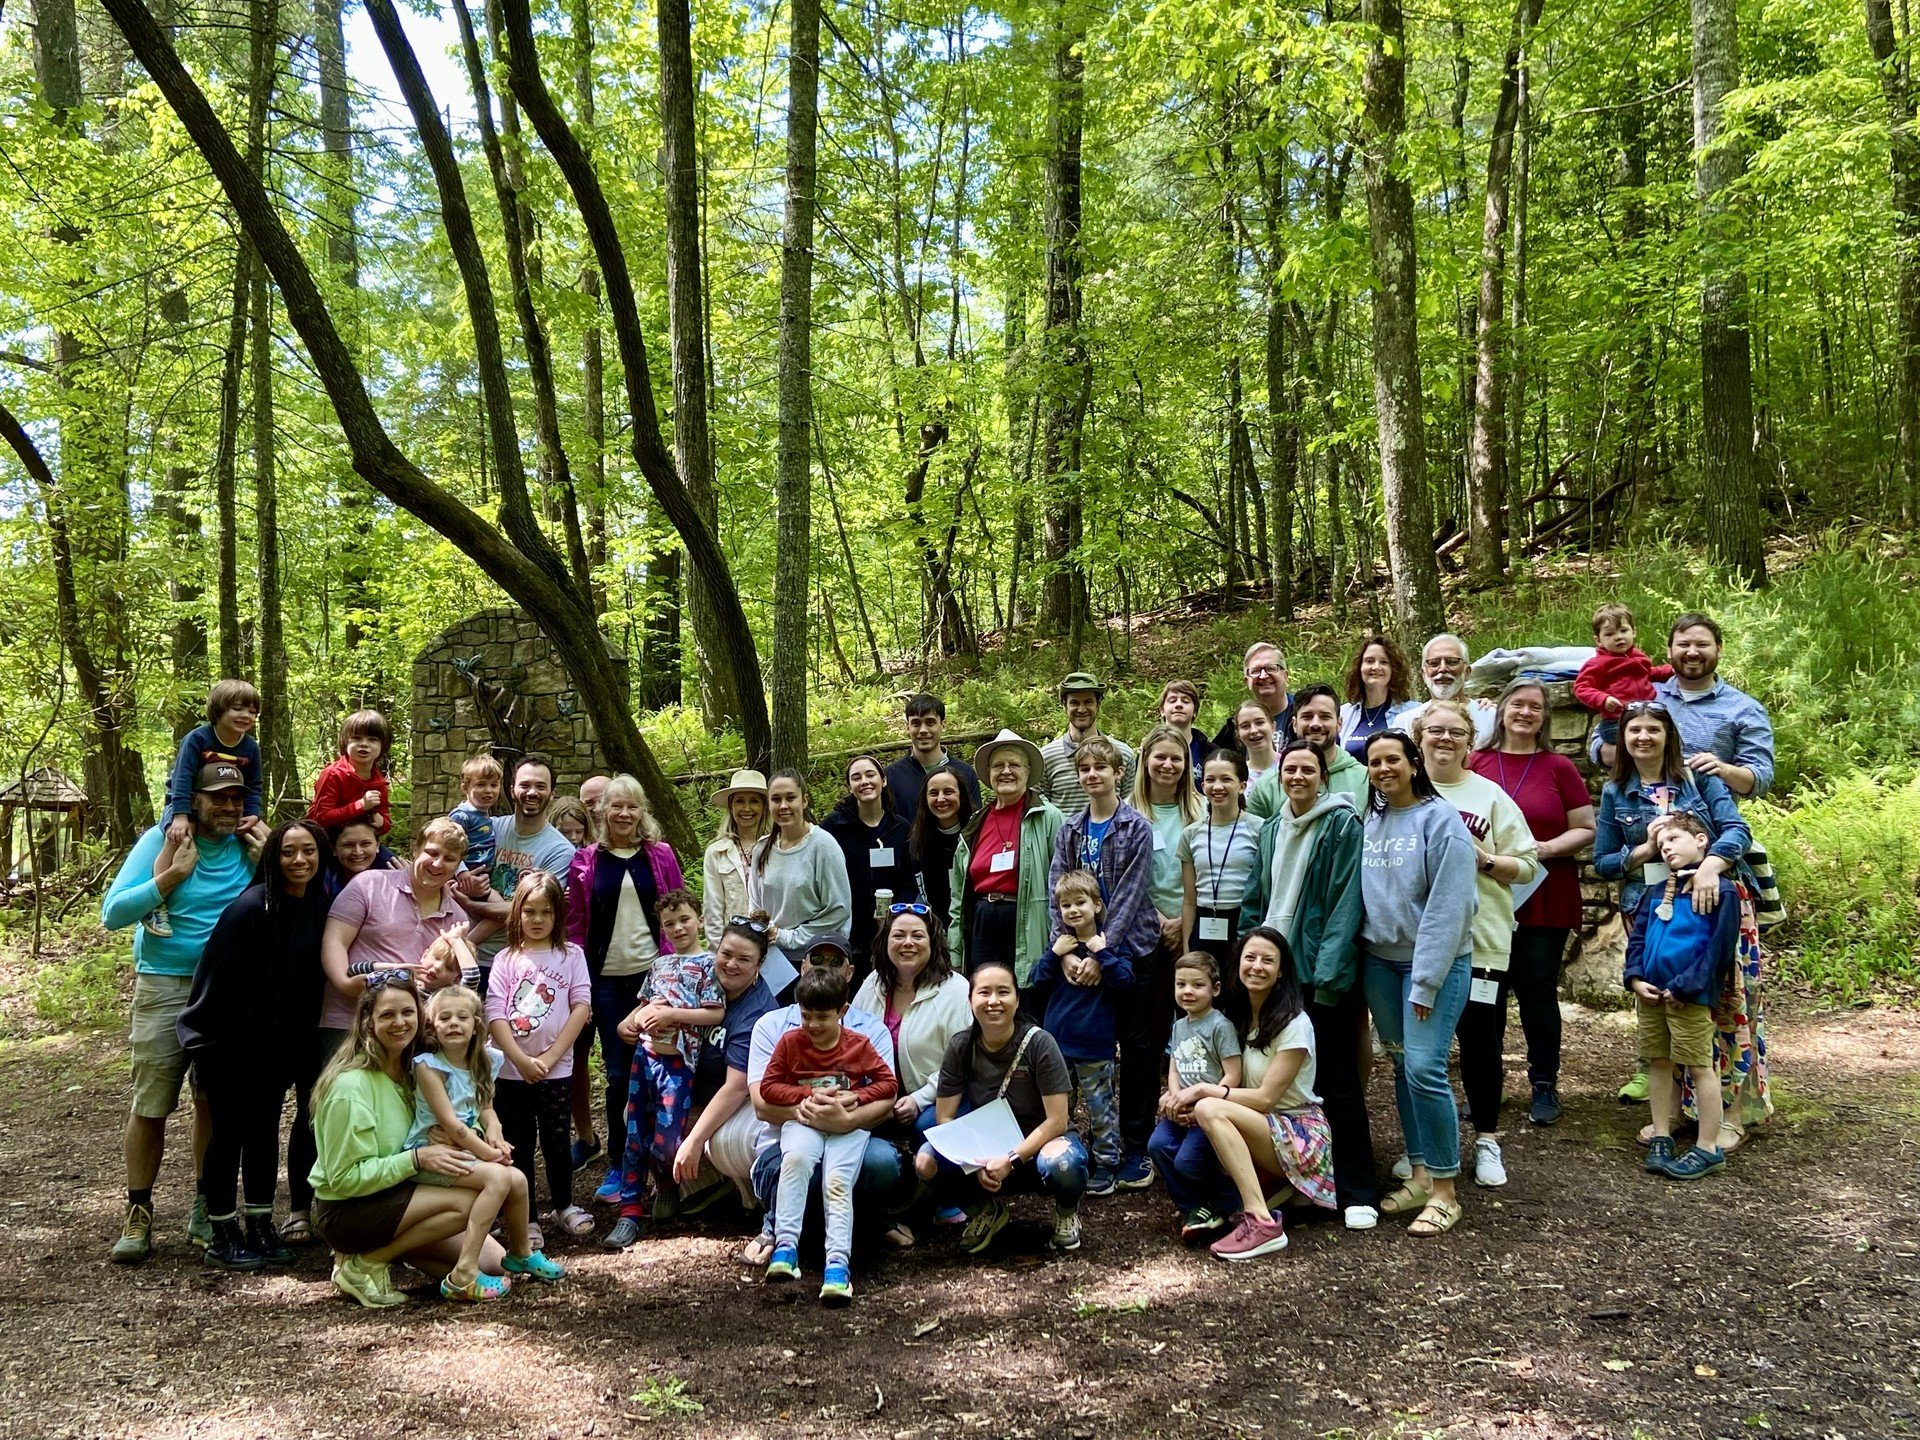 St. Martin's clergy, staff, and parishioners enjoyed a wonderful weekend in the North Carolina mountains at @kanugaepiscopal recently! 

It was a weekend filled with music, fellowship, friendship, dance, prayer, worship, quiet, reflection, hikes, and